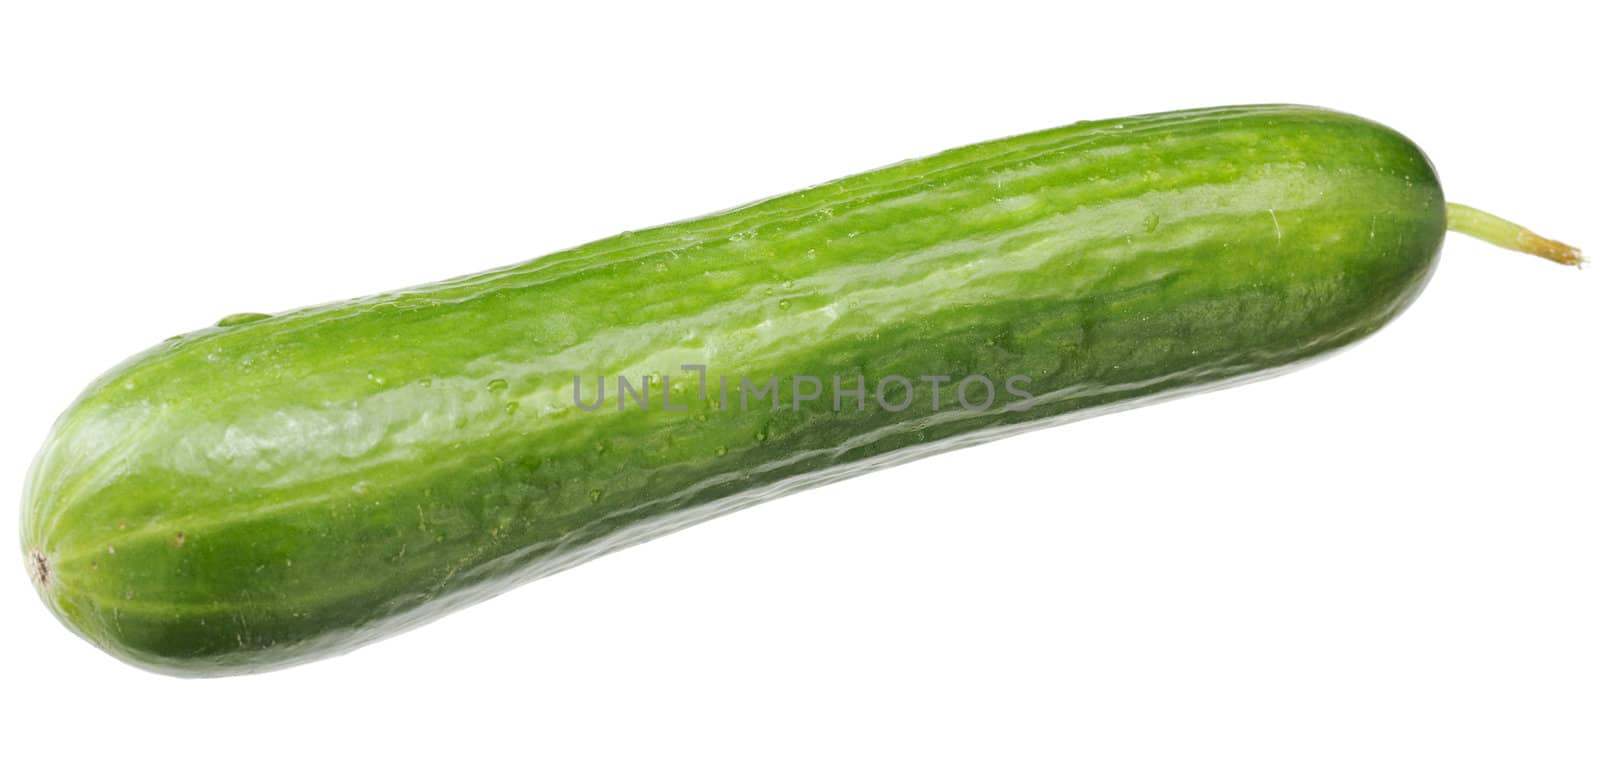 A long green fresh cucumber with a sticking out sprig lying on a table